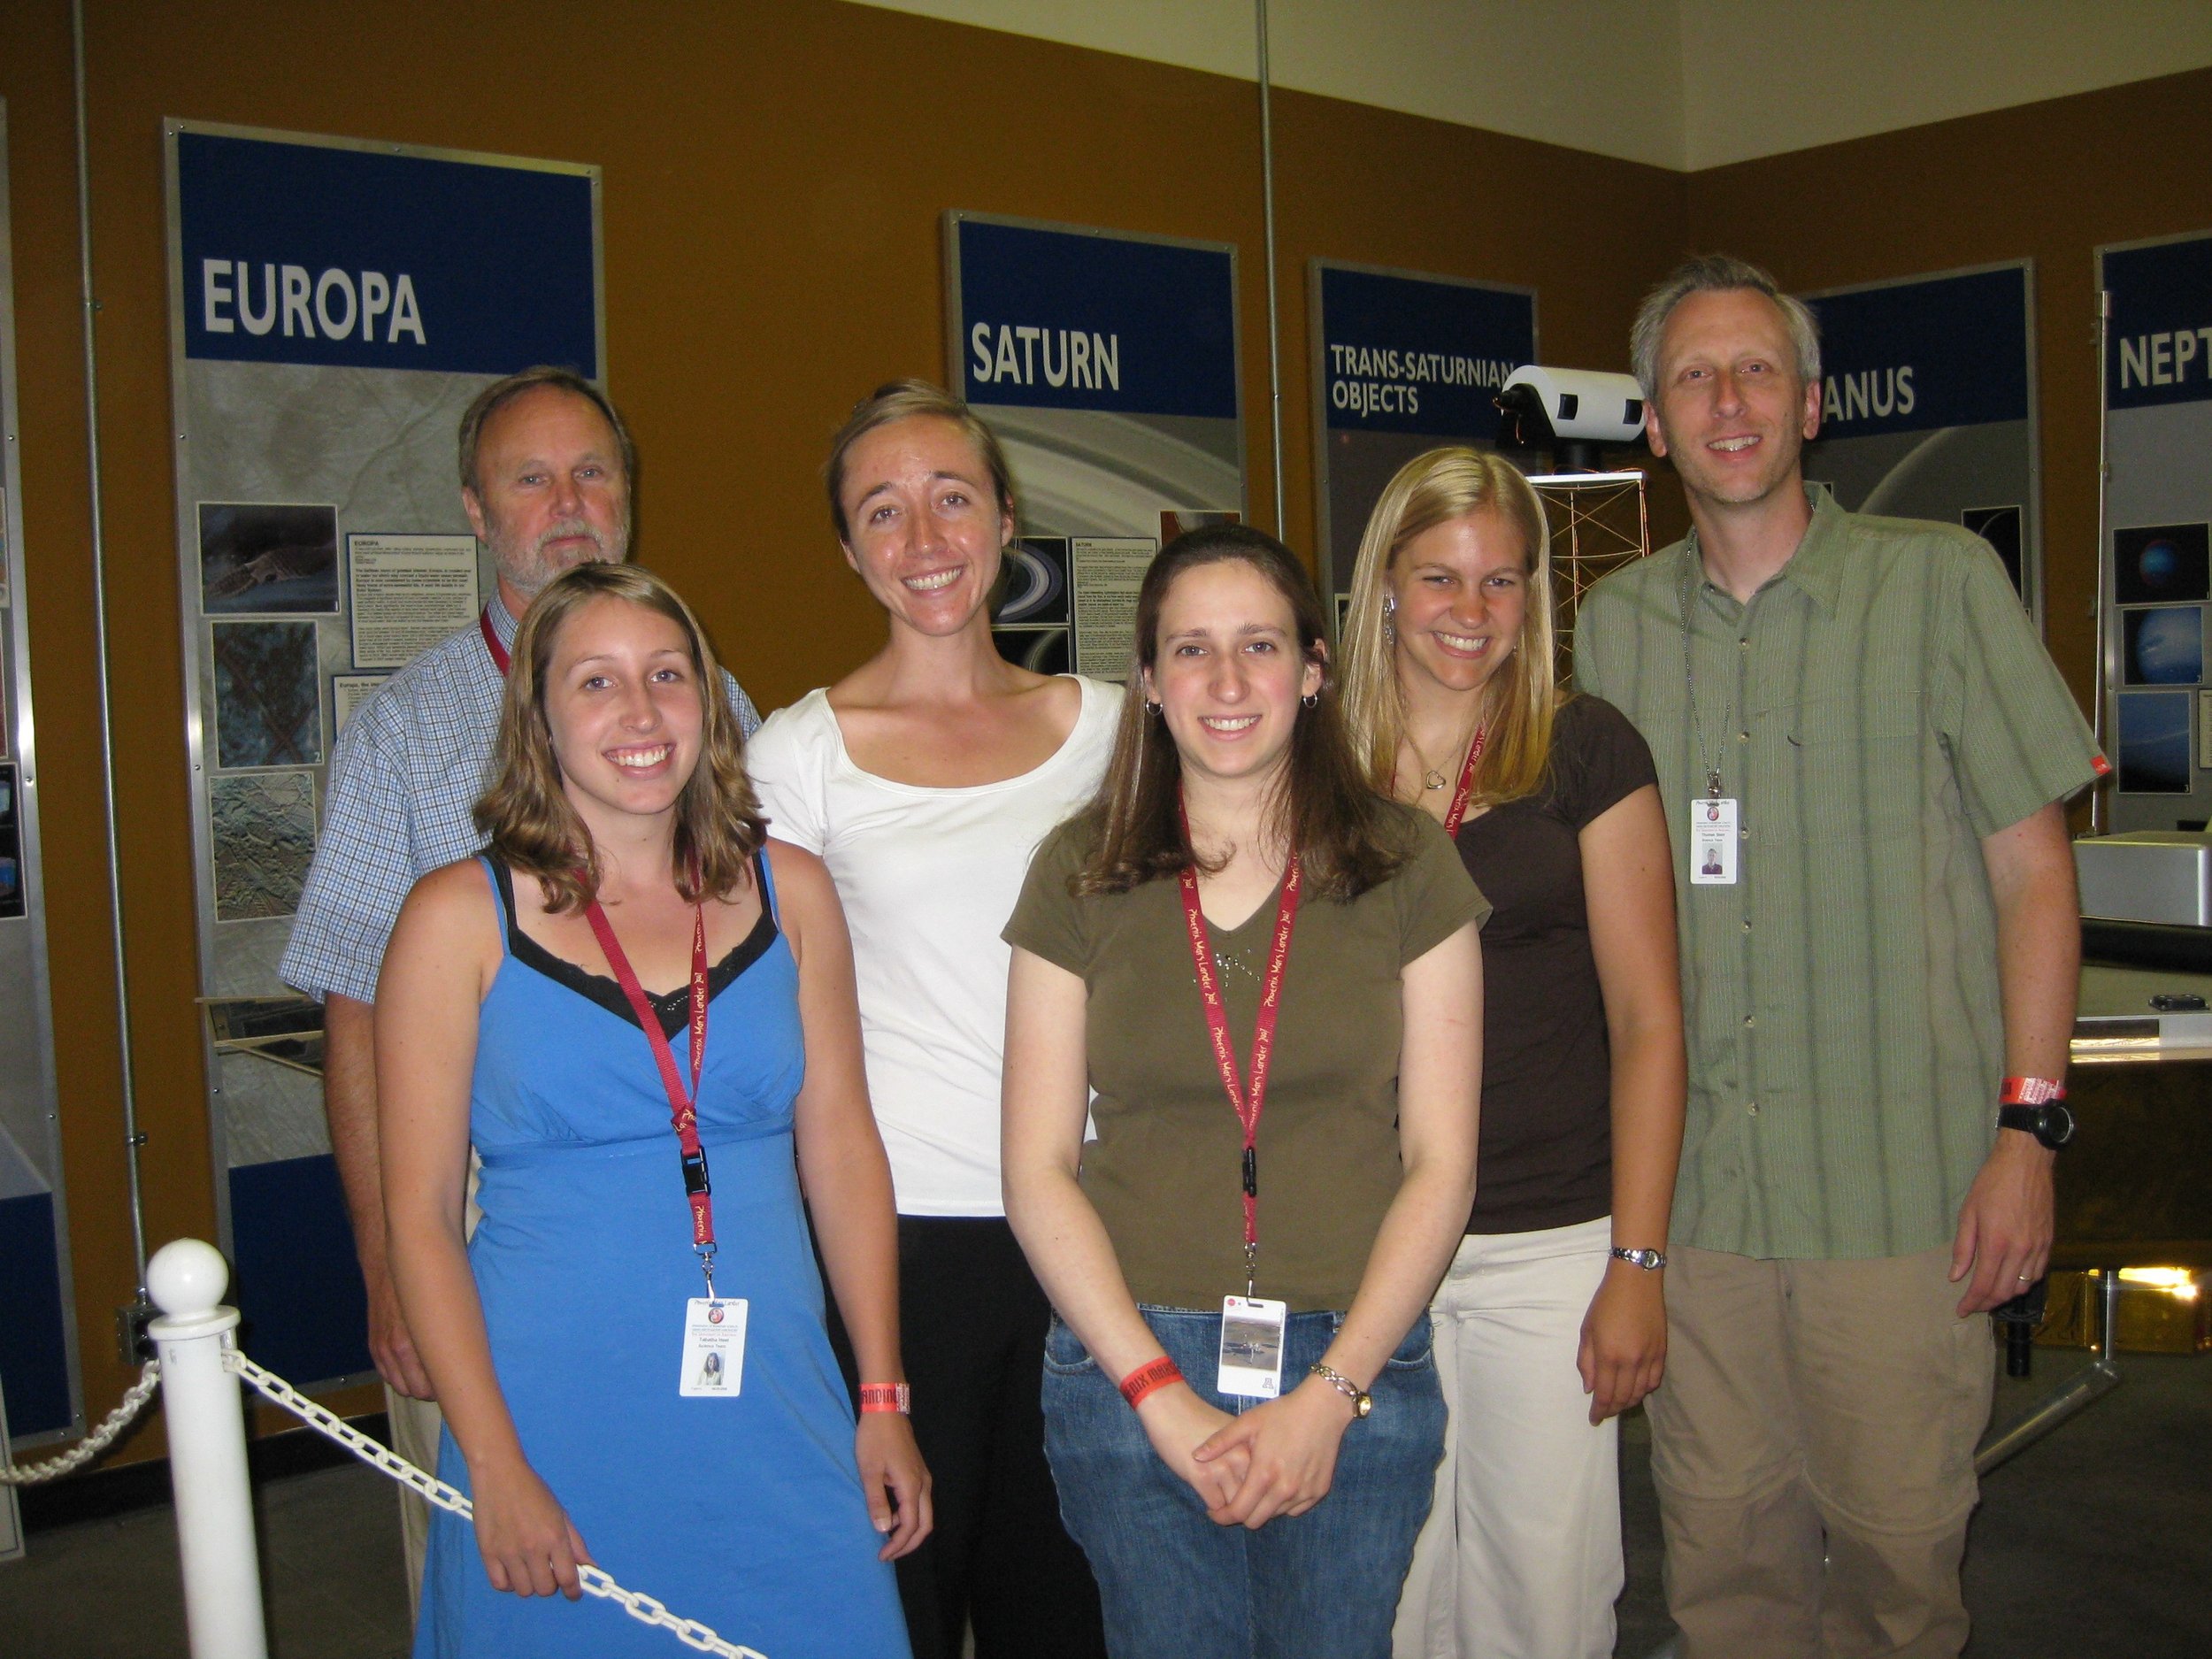  The group from Washington University in St. Louis who went to Tucson to operate the Phoenix lander (taken on the day Phoenix landed, May 25, 2008) 